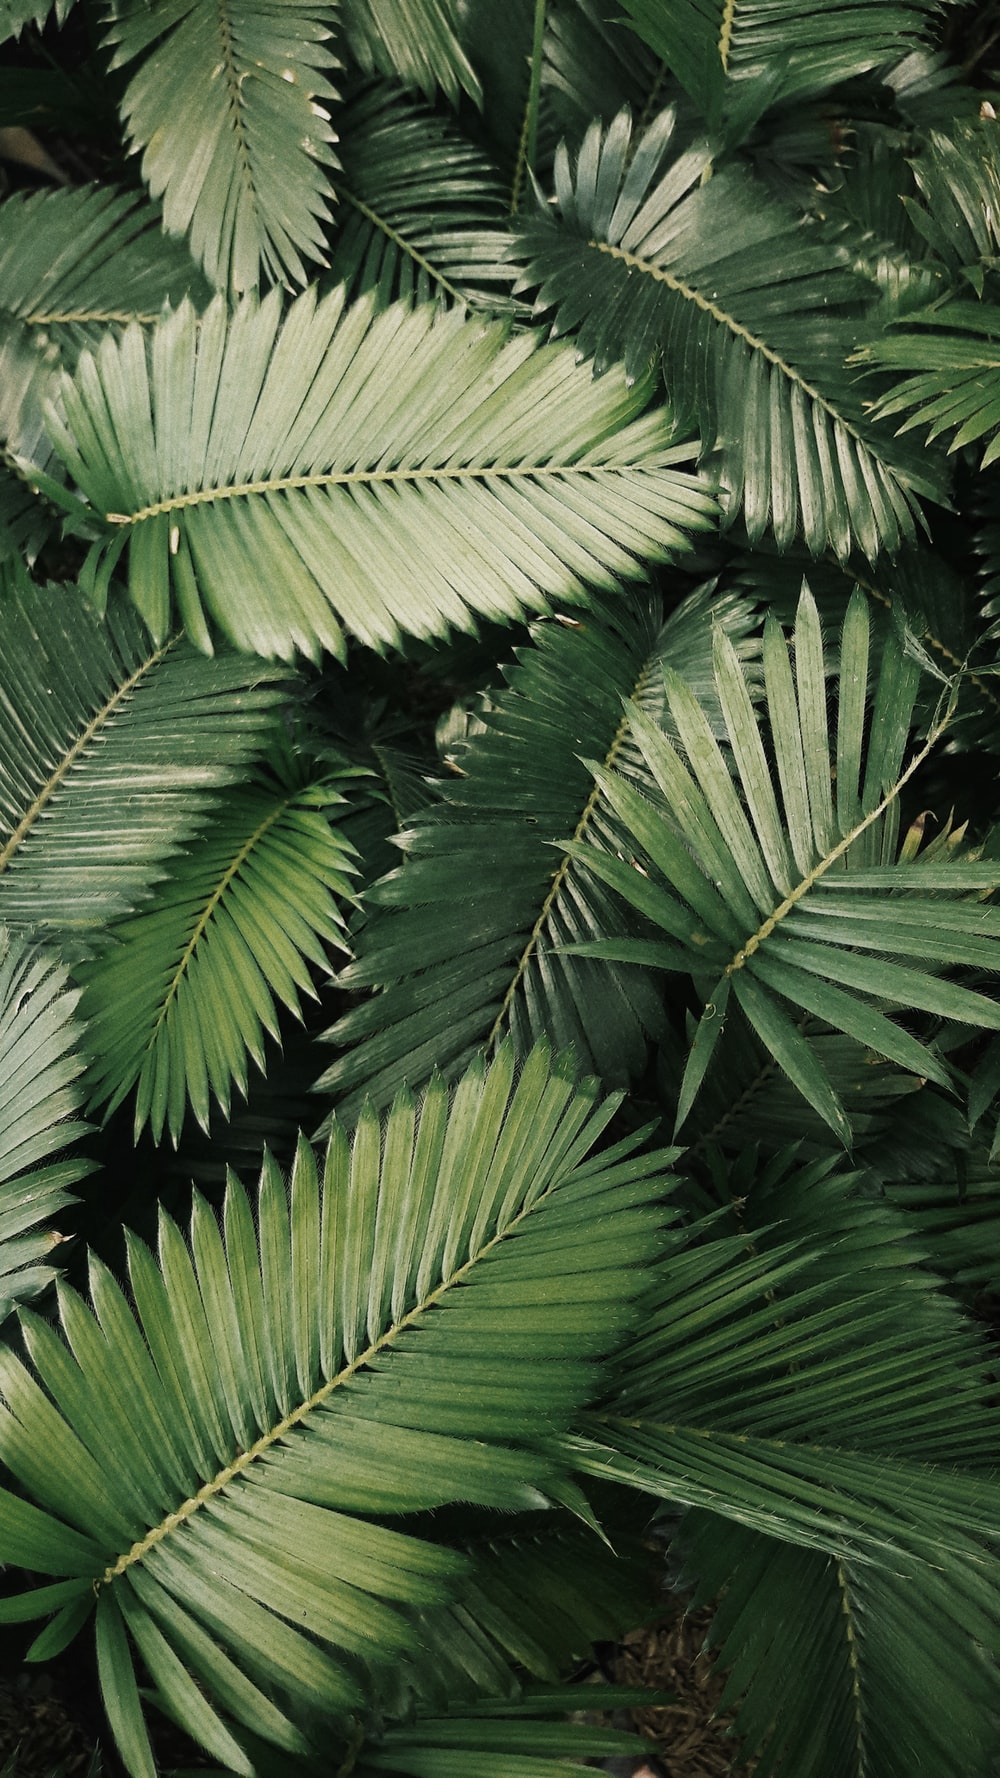 Tropical Leaf Picture. Download Free Image